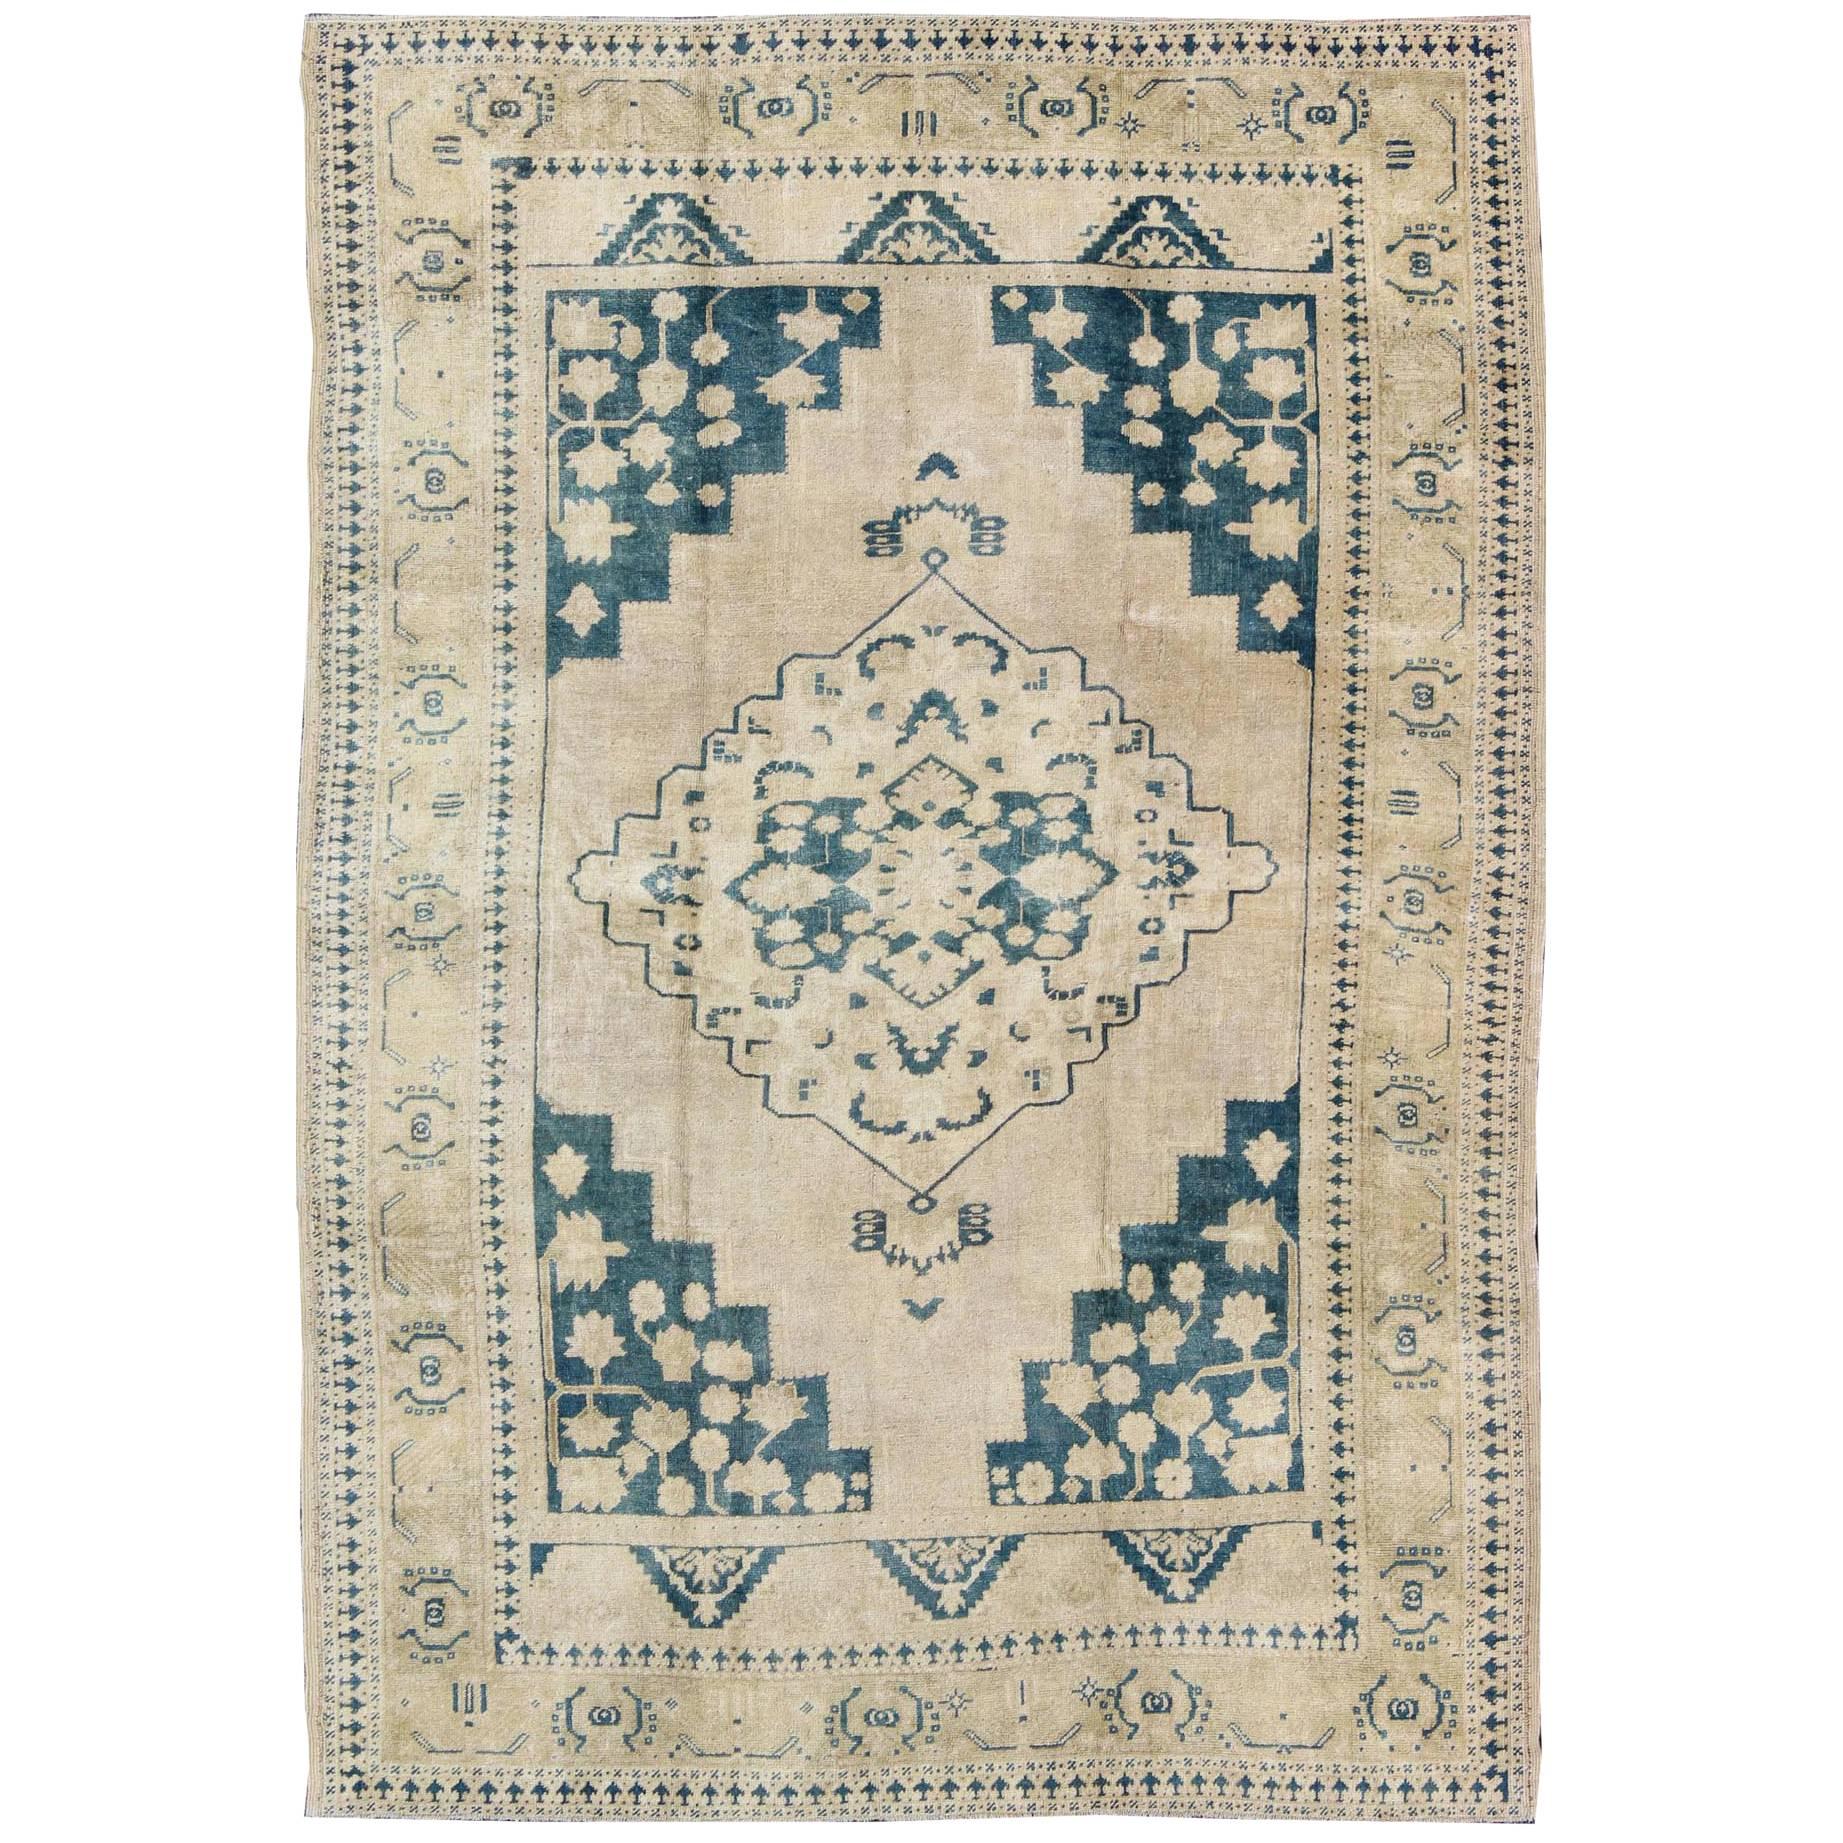 Vintage Turkish Oushak Rug in Blue and Cream colors